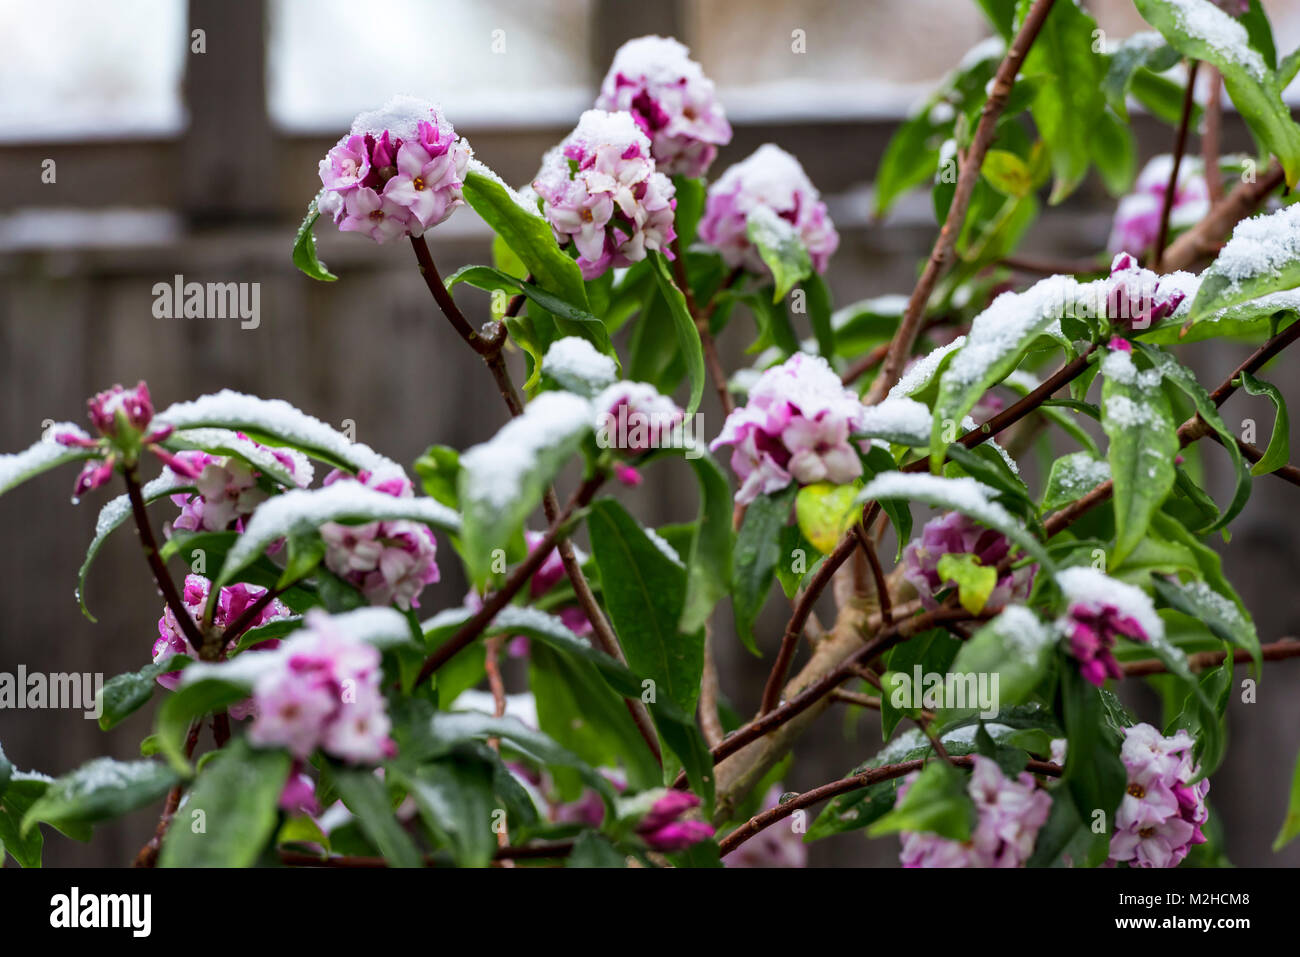 Daphne bholua Jacqueline Postill,winter flowering wth a covering of snow. Stock Photo